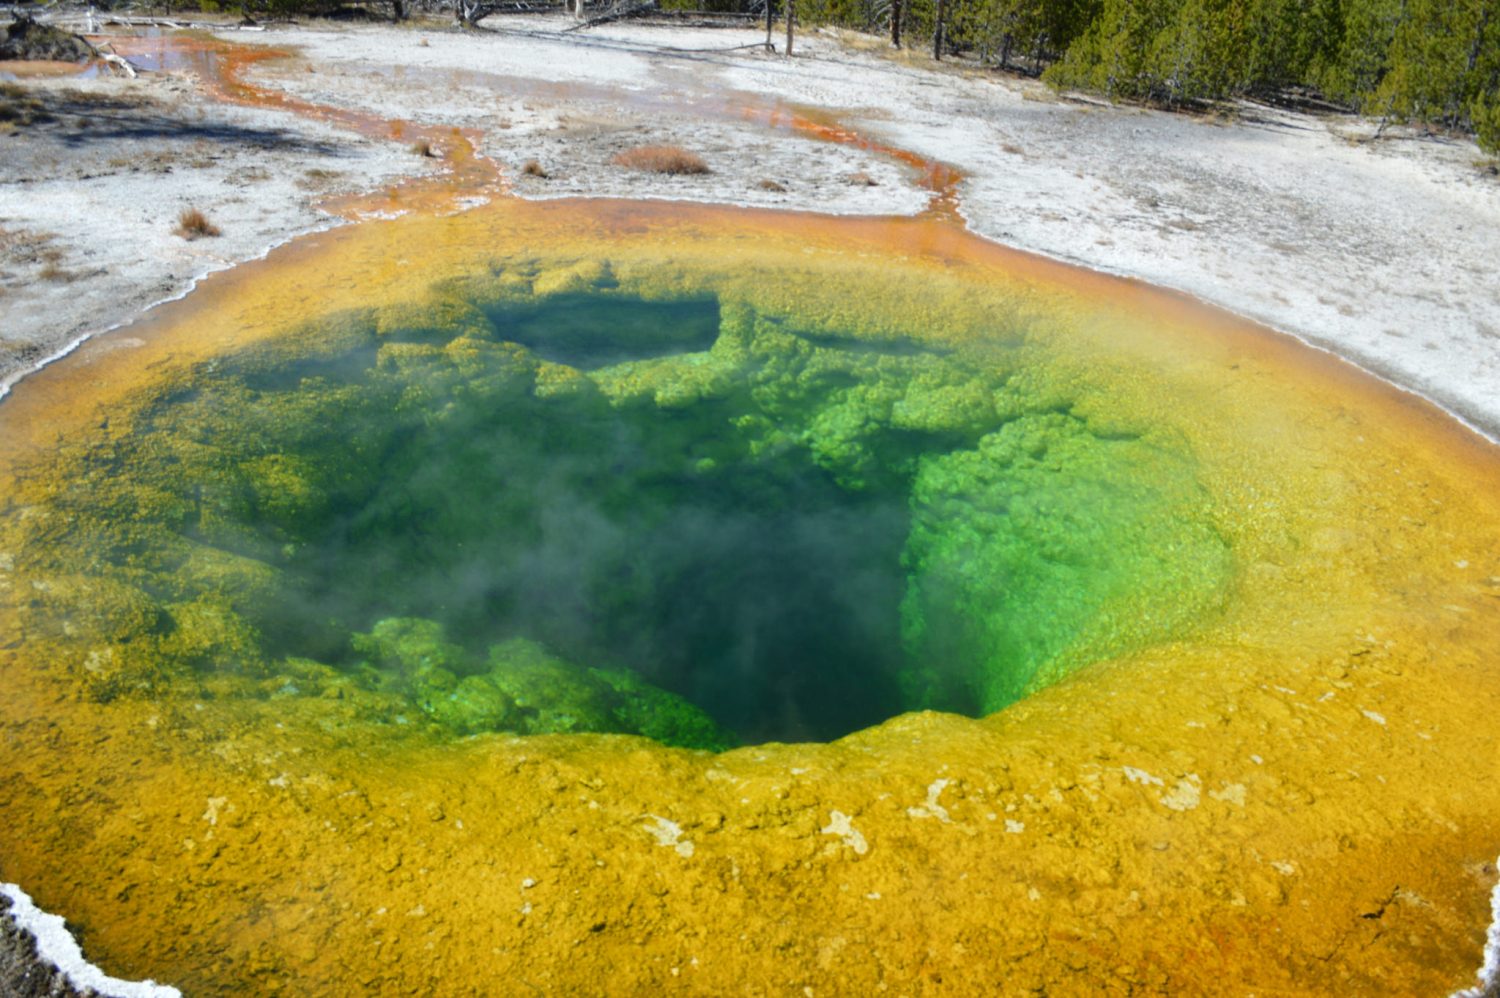 Ultimate things to see in Yellowstone National Park